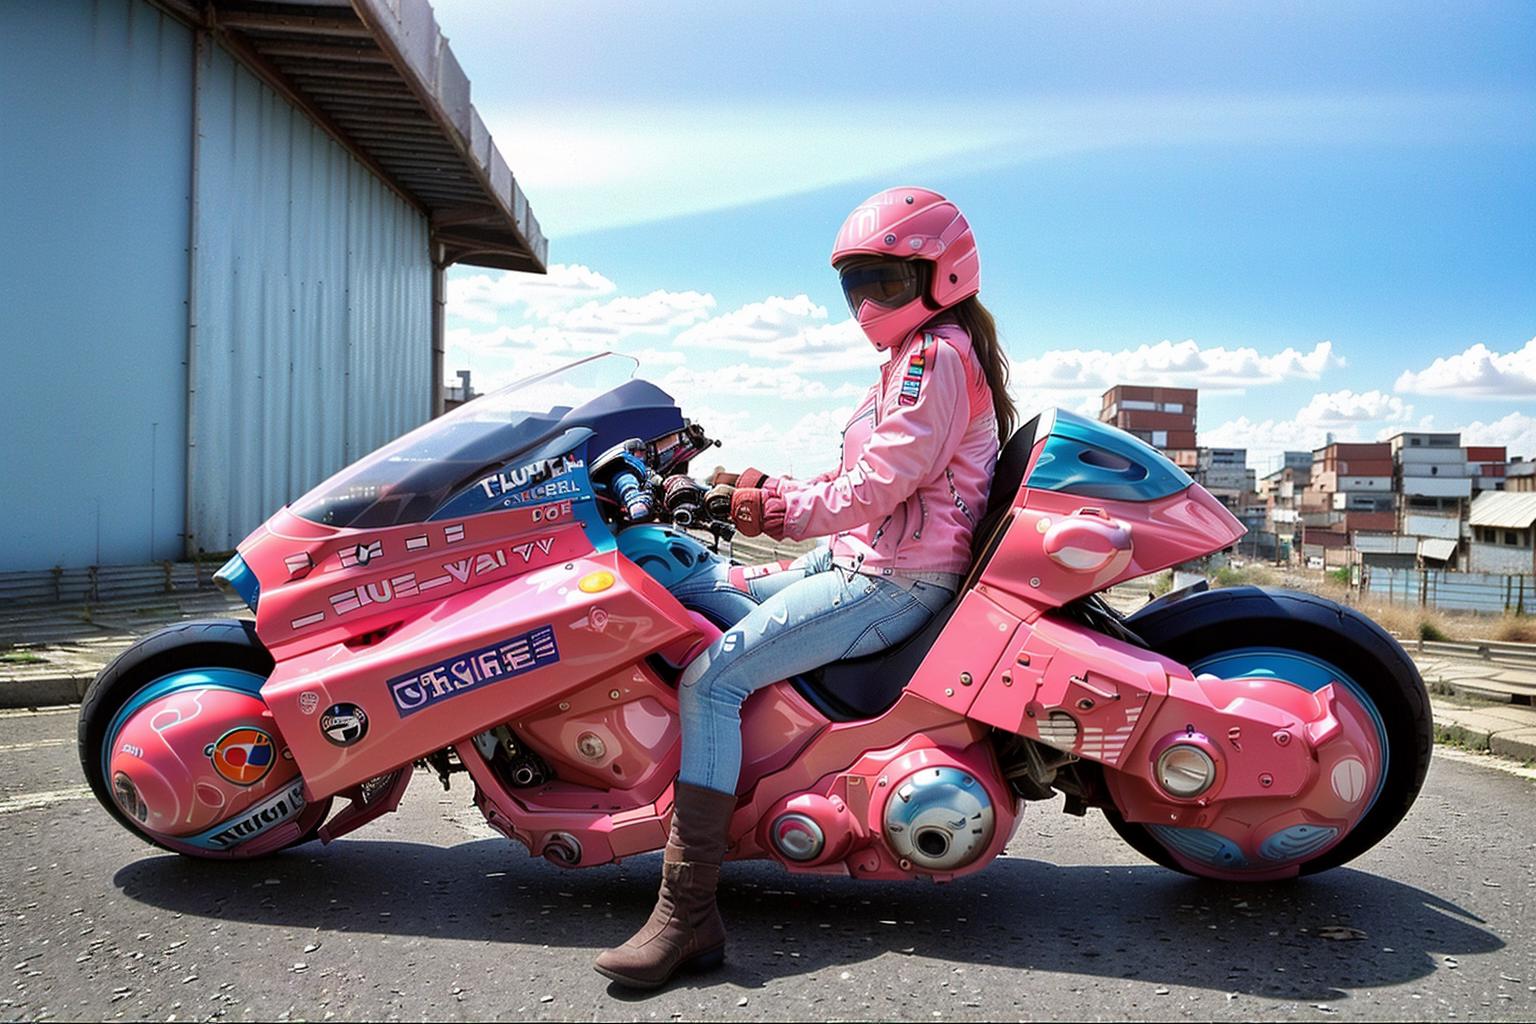 A woman wearing a pink helmet is sitting on a pink motorcycle.